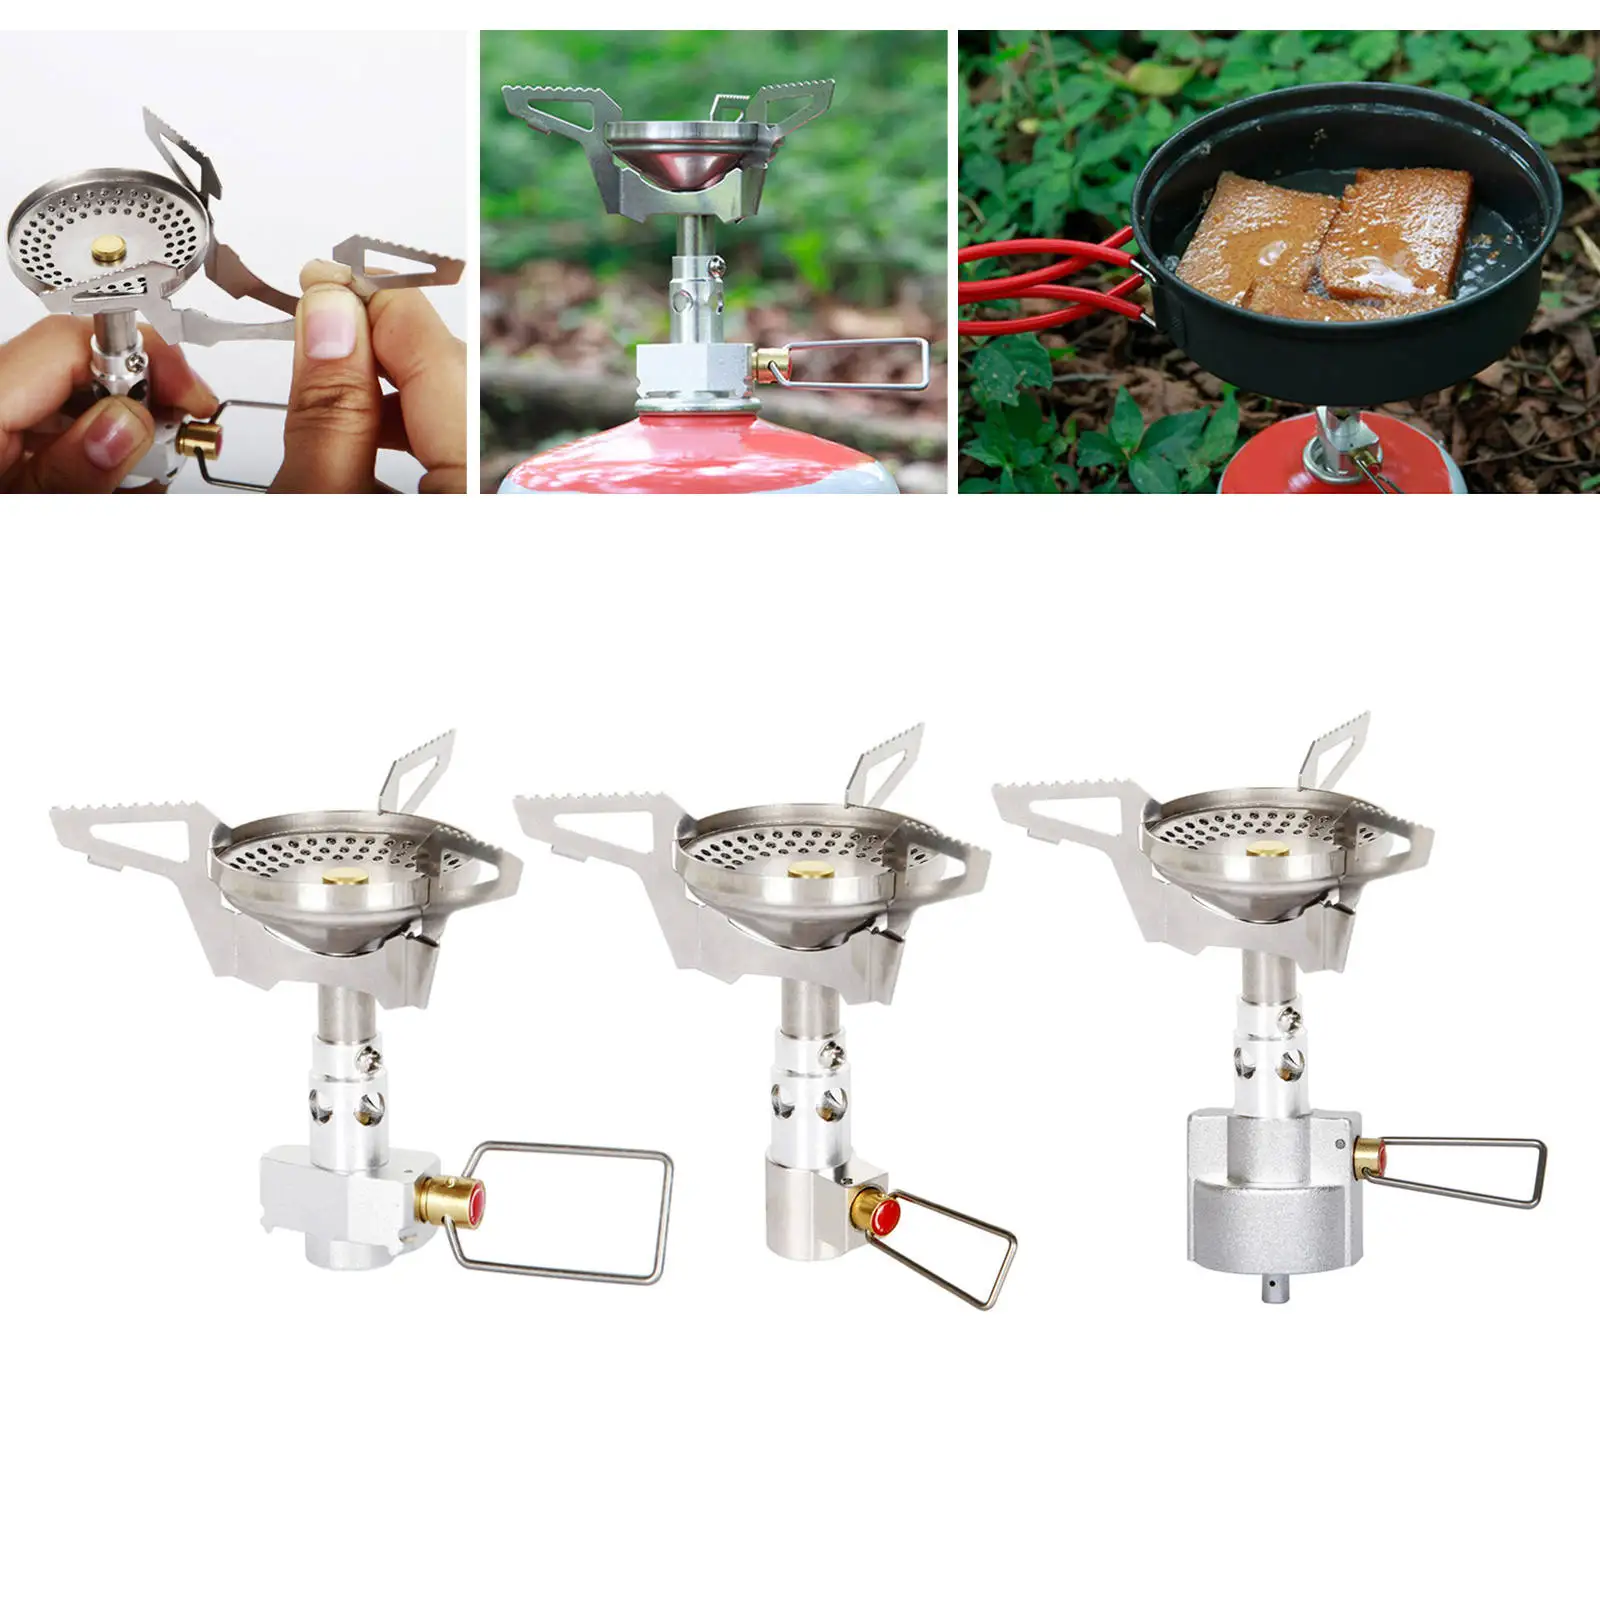 Ultralight Tourism Removable Gas Stove Camping Equipment Mini Camp Cooking Supplies Outdoor Survival Bushcraft Hiking Sports